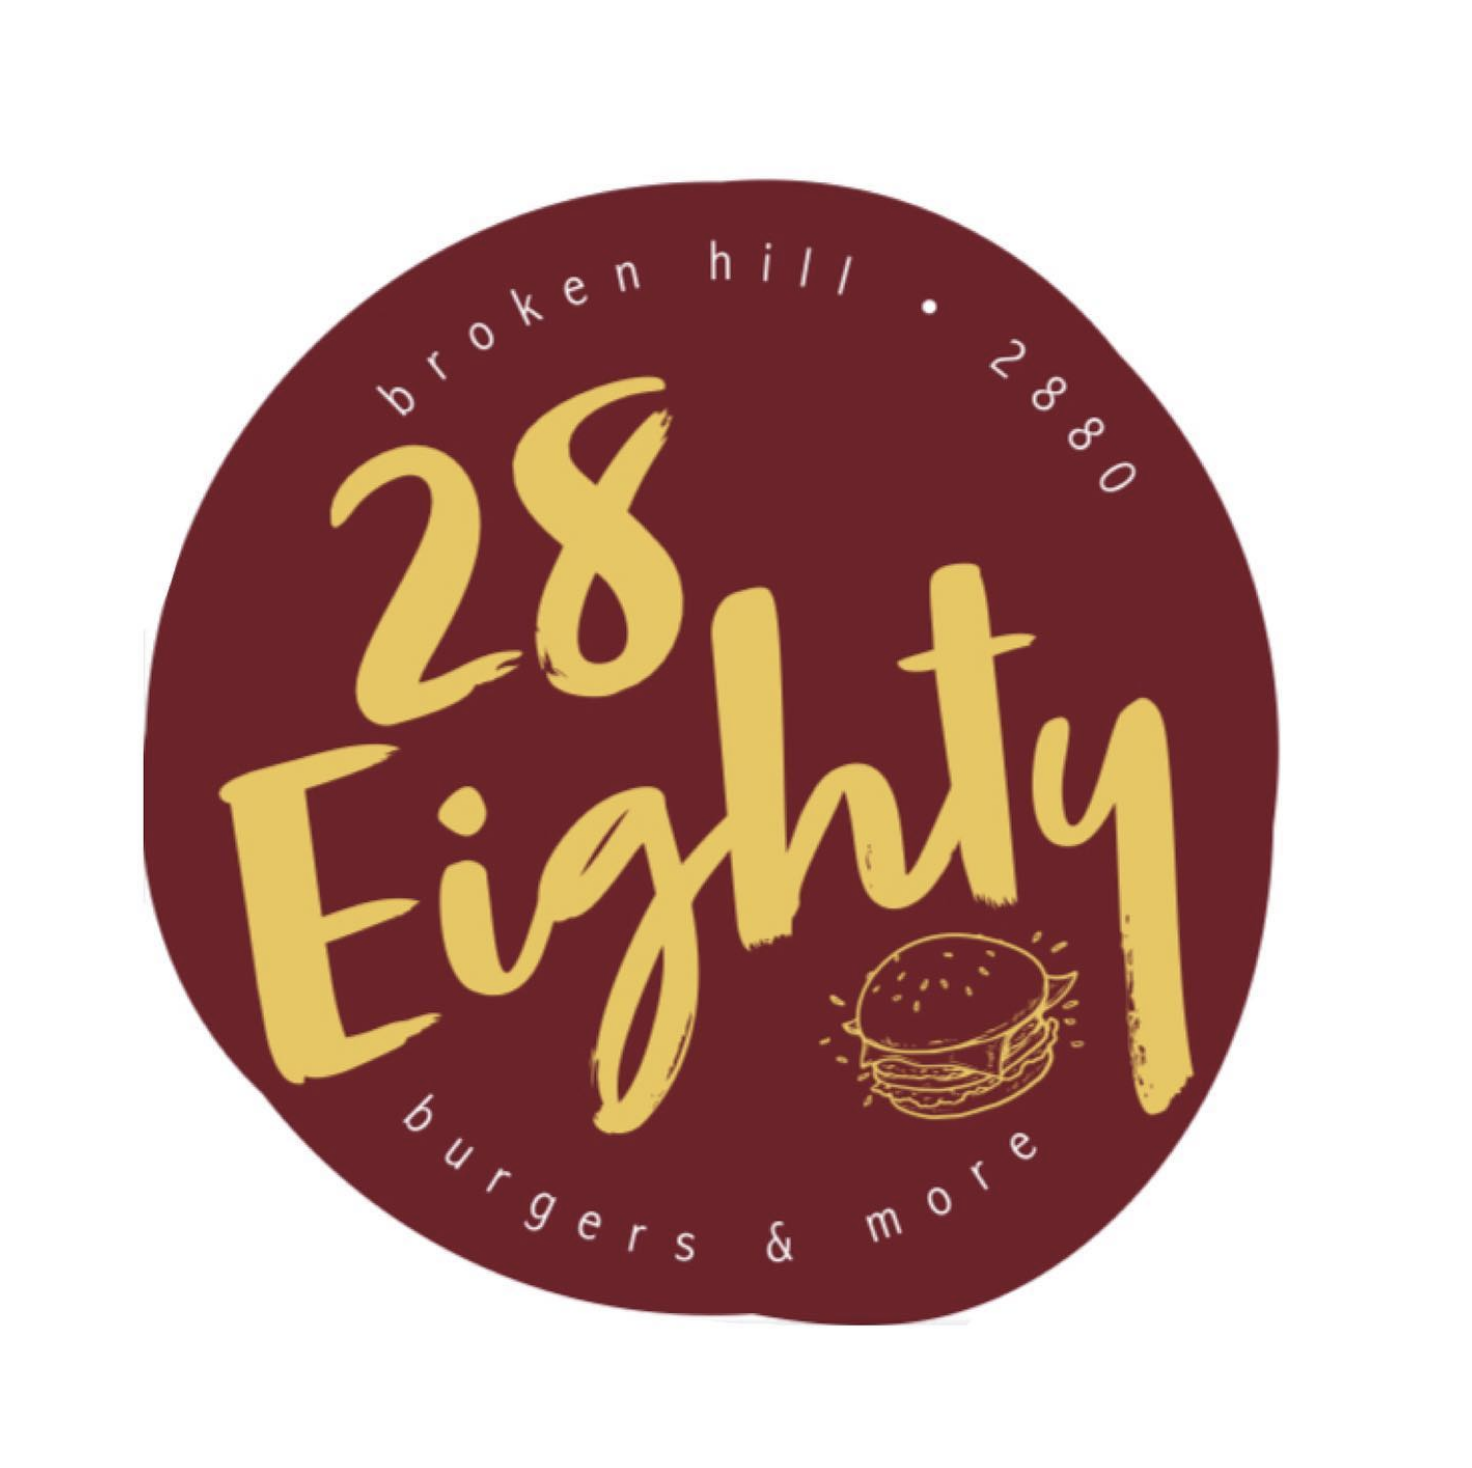 Logo Design Food and Beverage_Broken Hill_28eighty_Spicer's Creative.png